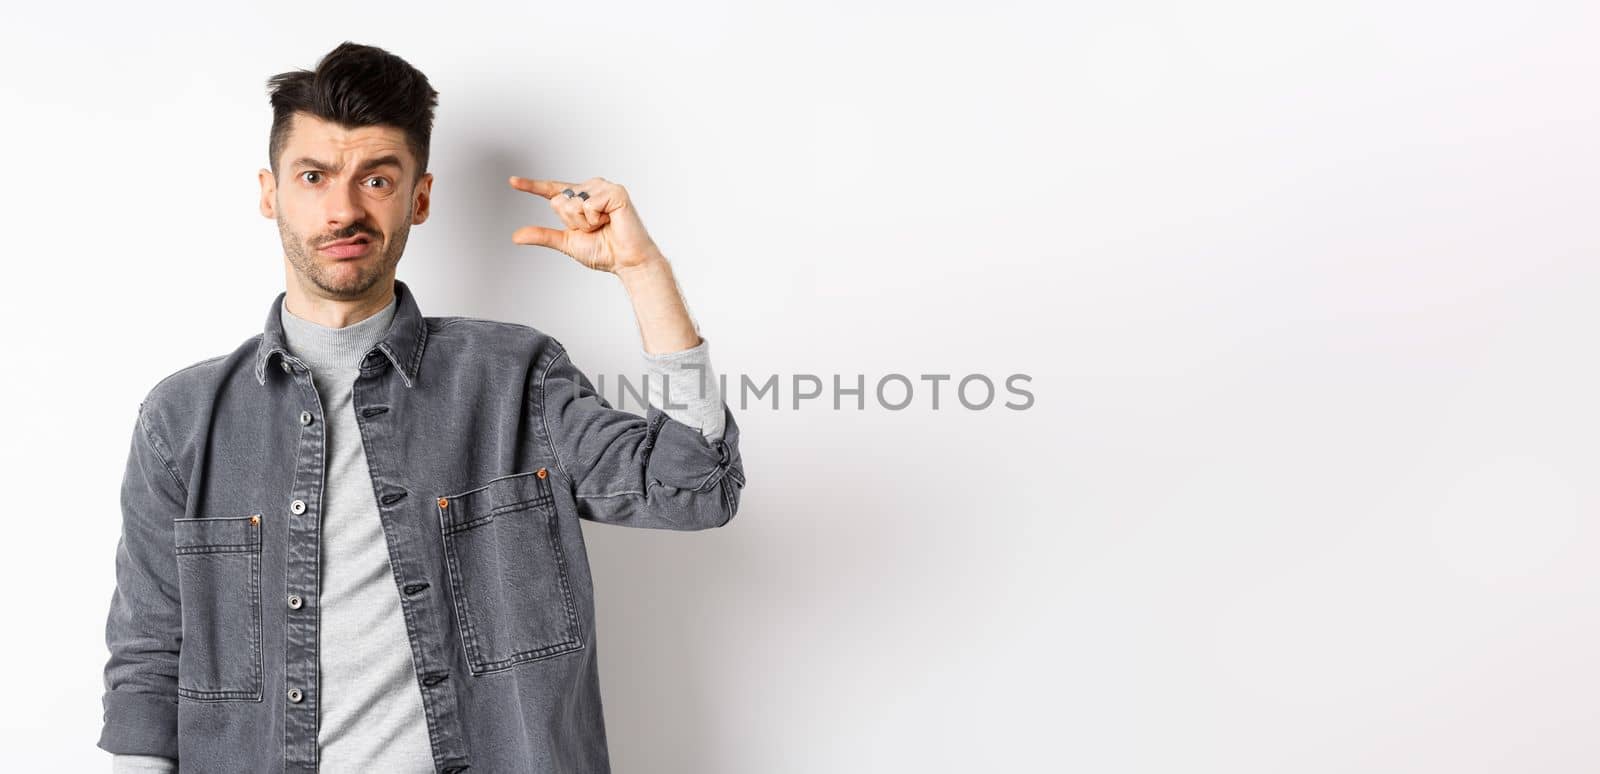 Disappointed guy showing small size and grimacing upset, frowning displeased with little thing, standing on white background.